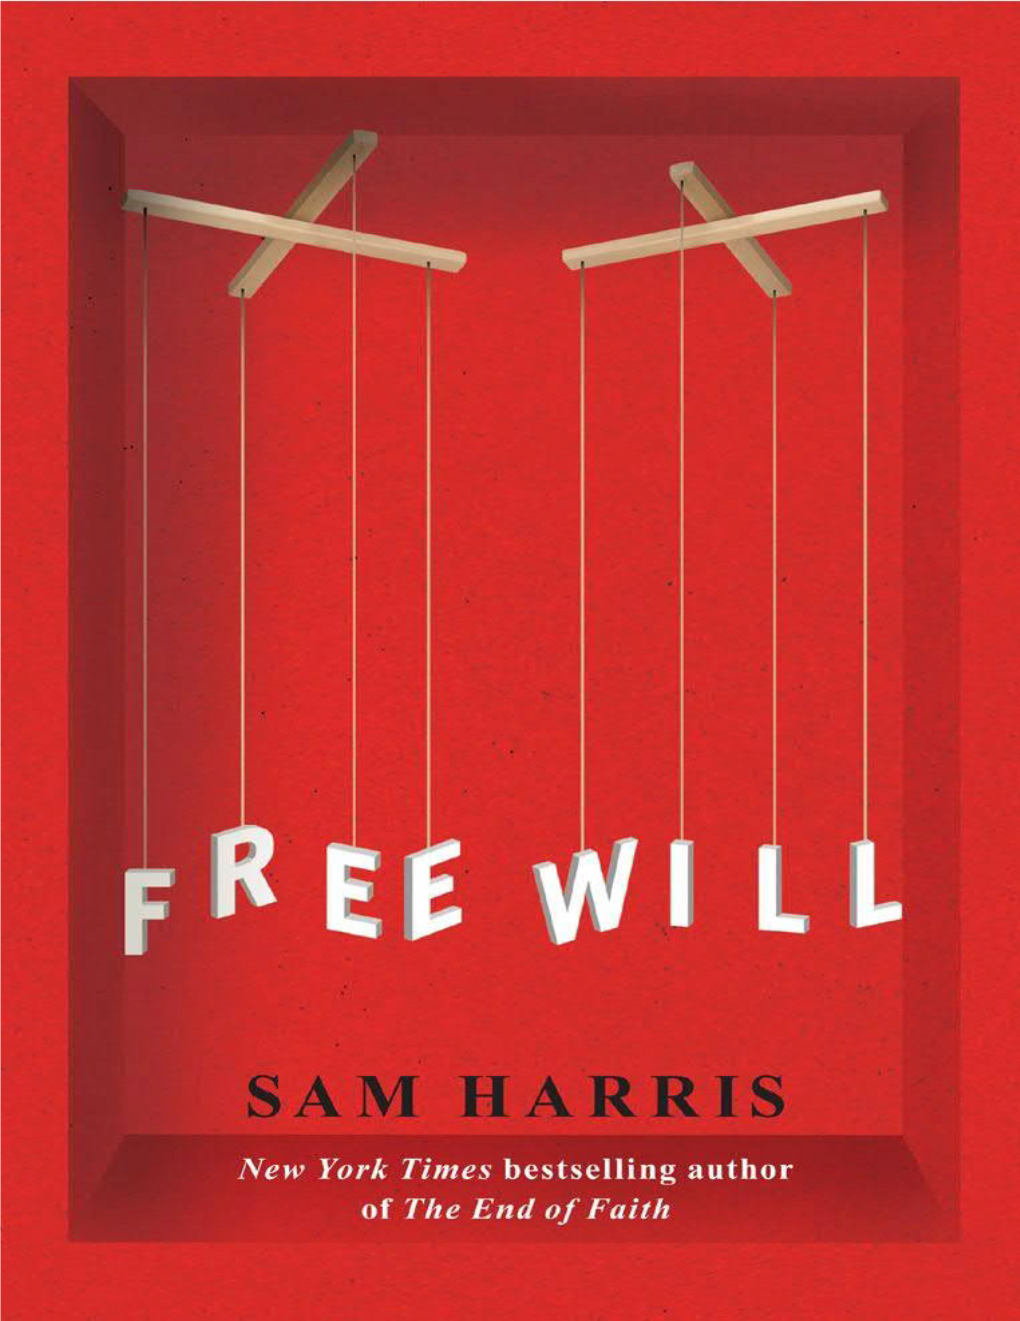 Free Will, Sam Harris Combines Neuroscience and Psychology to Lay This Illusion to Rest at Last